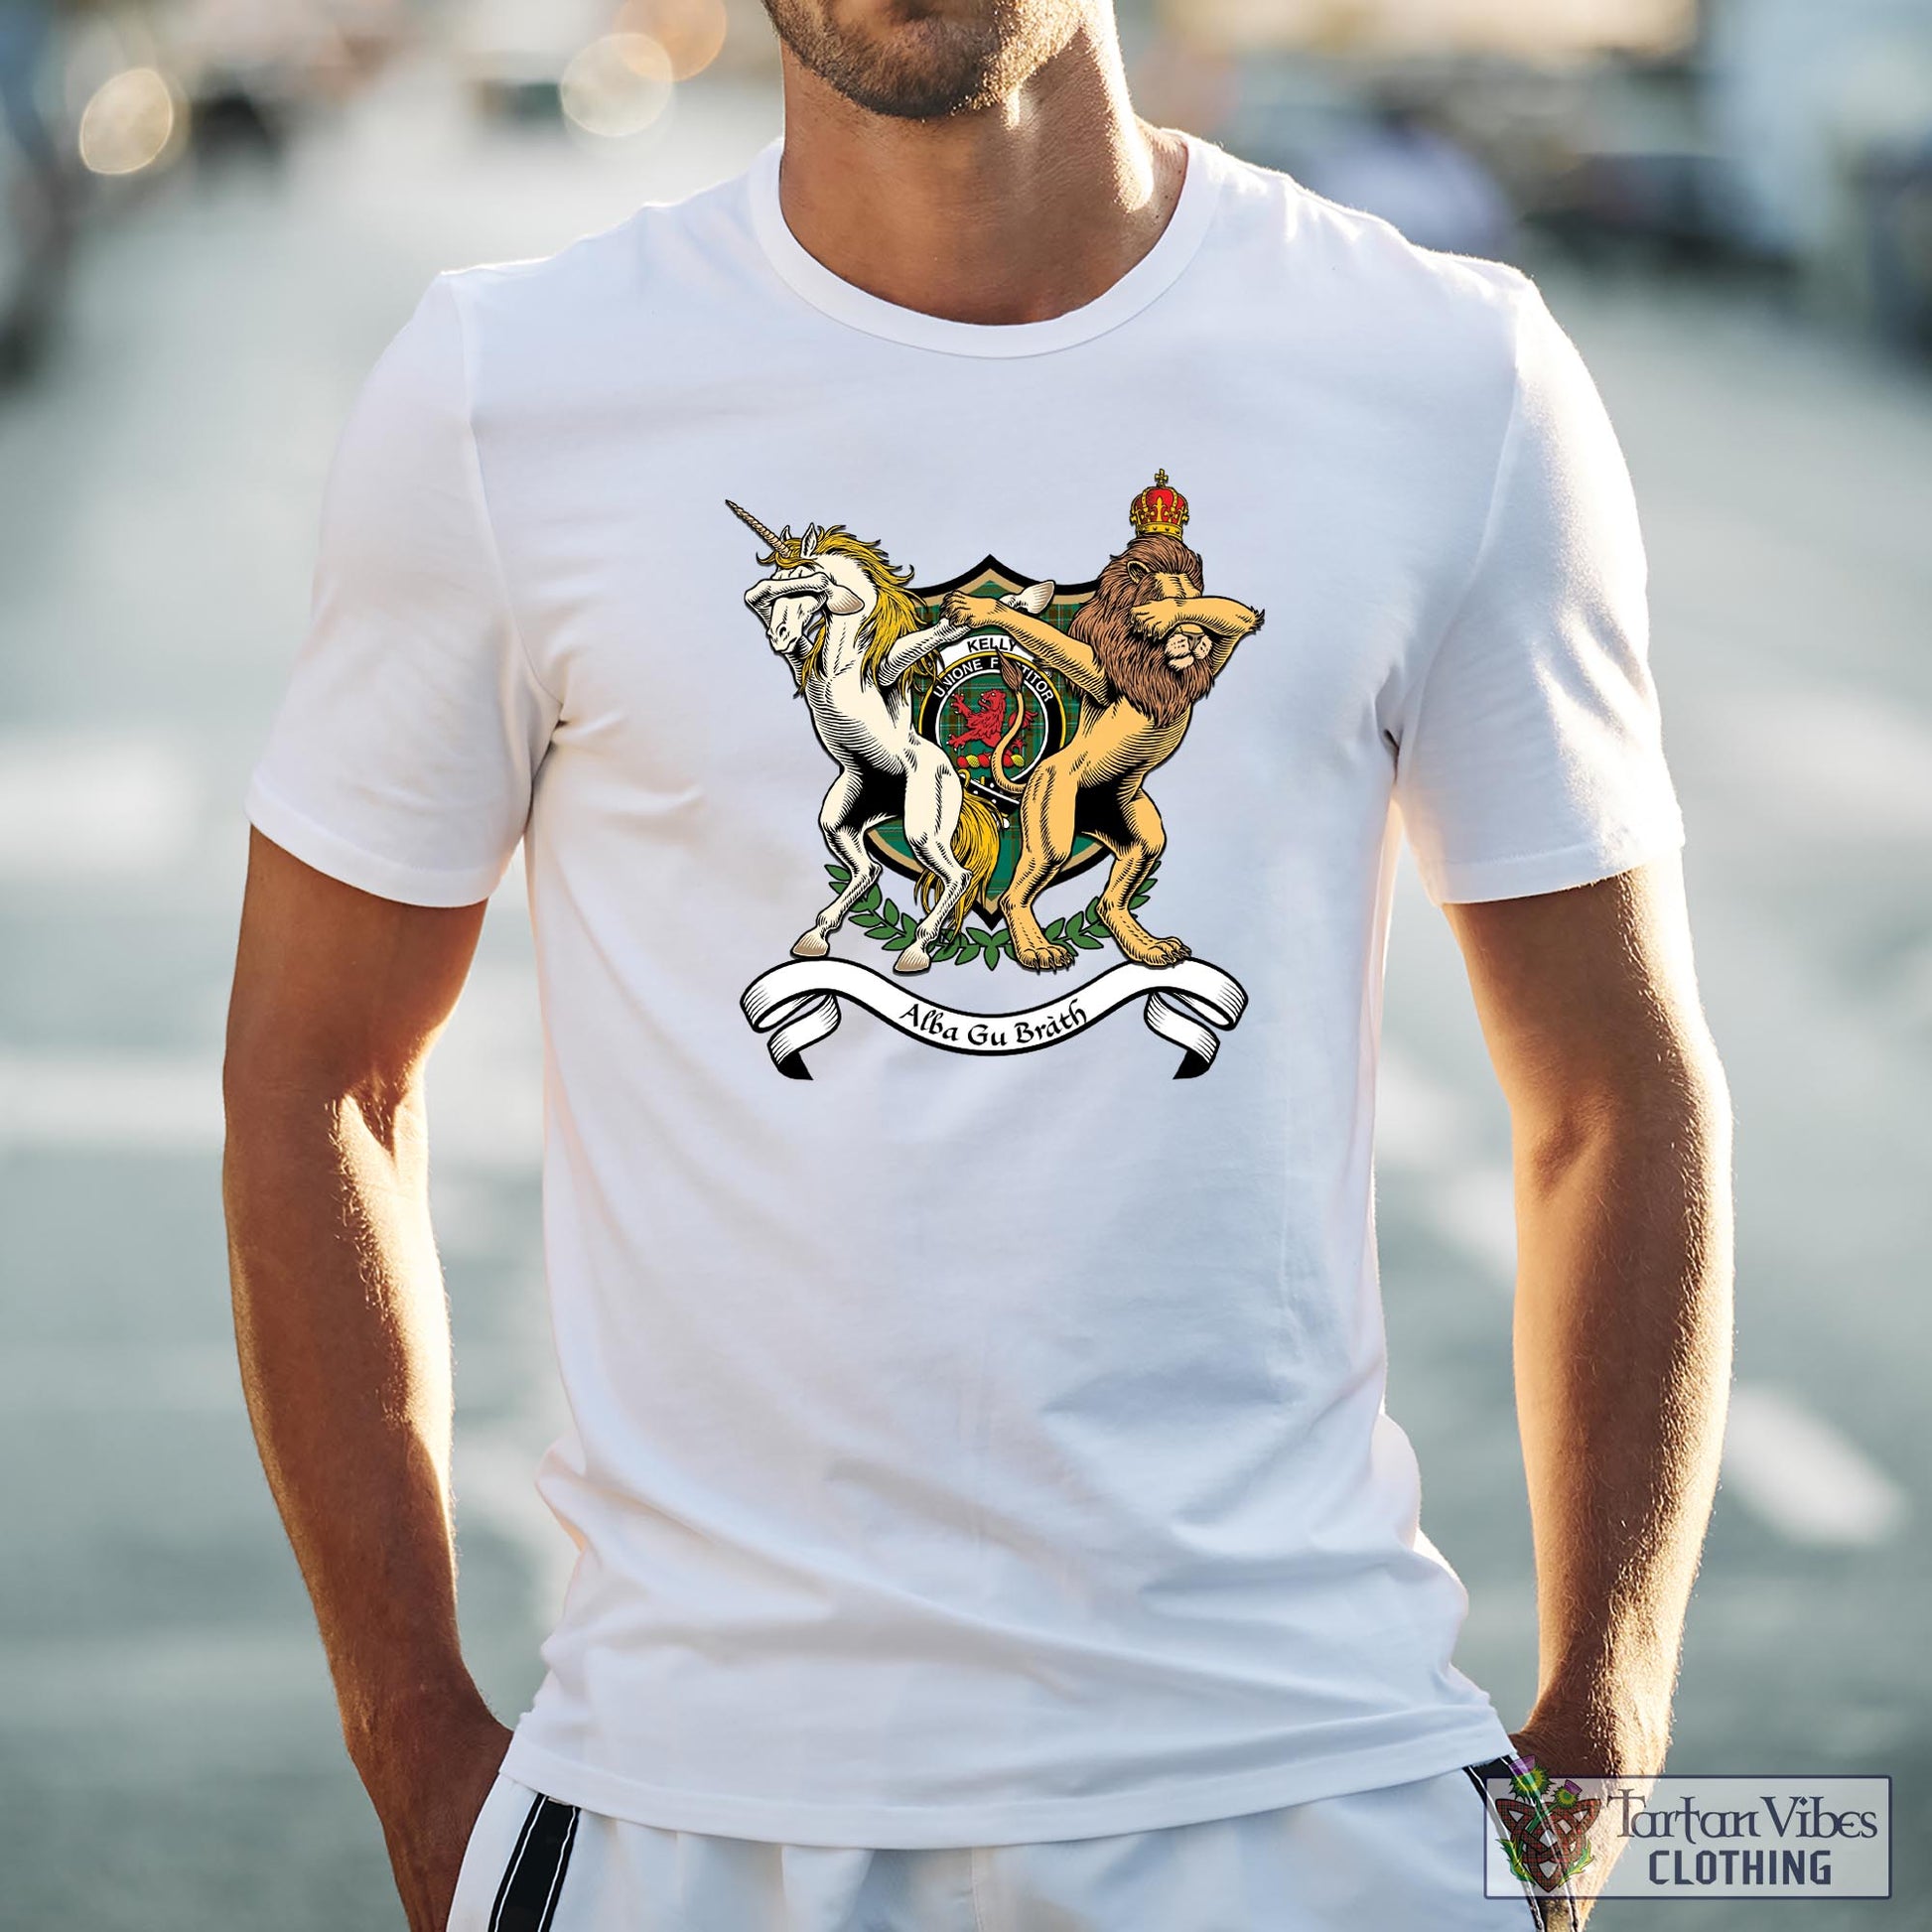 Tartan Vibes Clothing Kelly Dress Family Crest Cotton Men's T-Shirt with Scotland Royal Coat Of Arm Funny Style